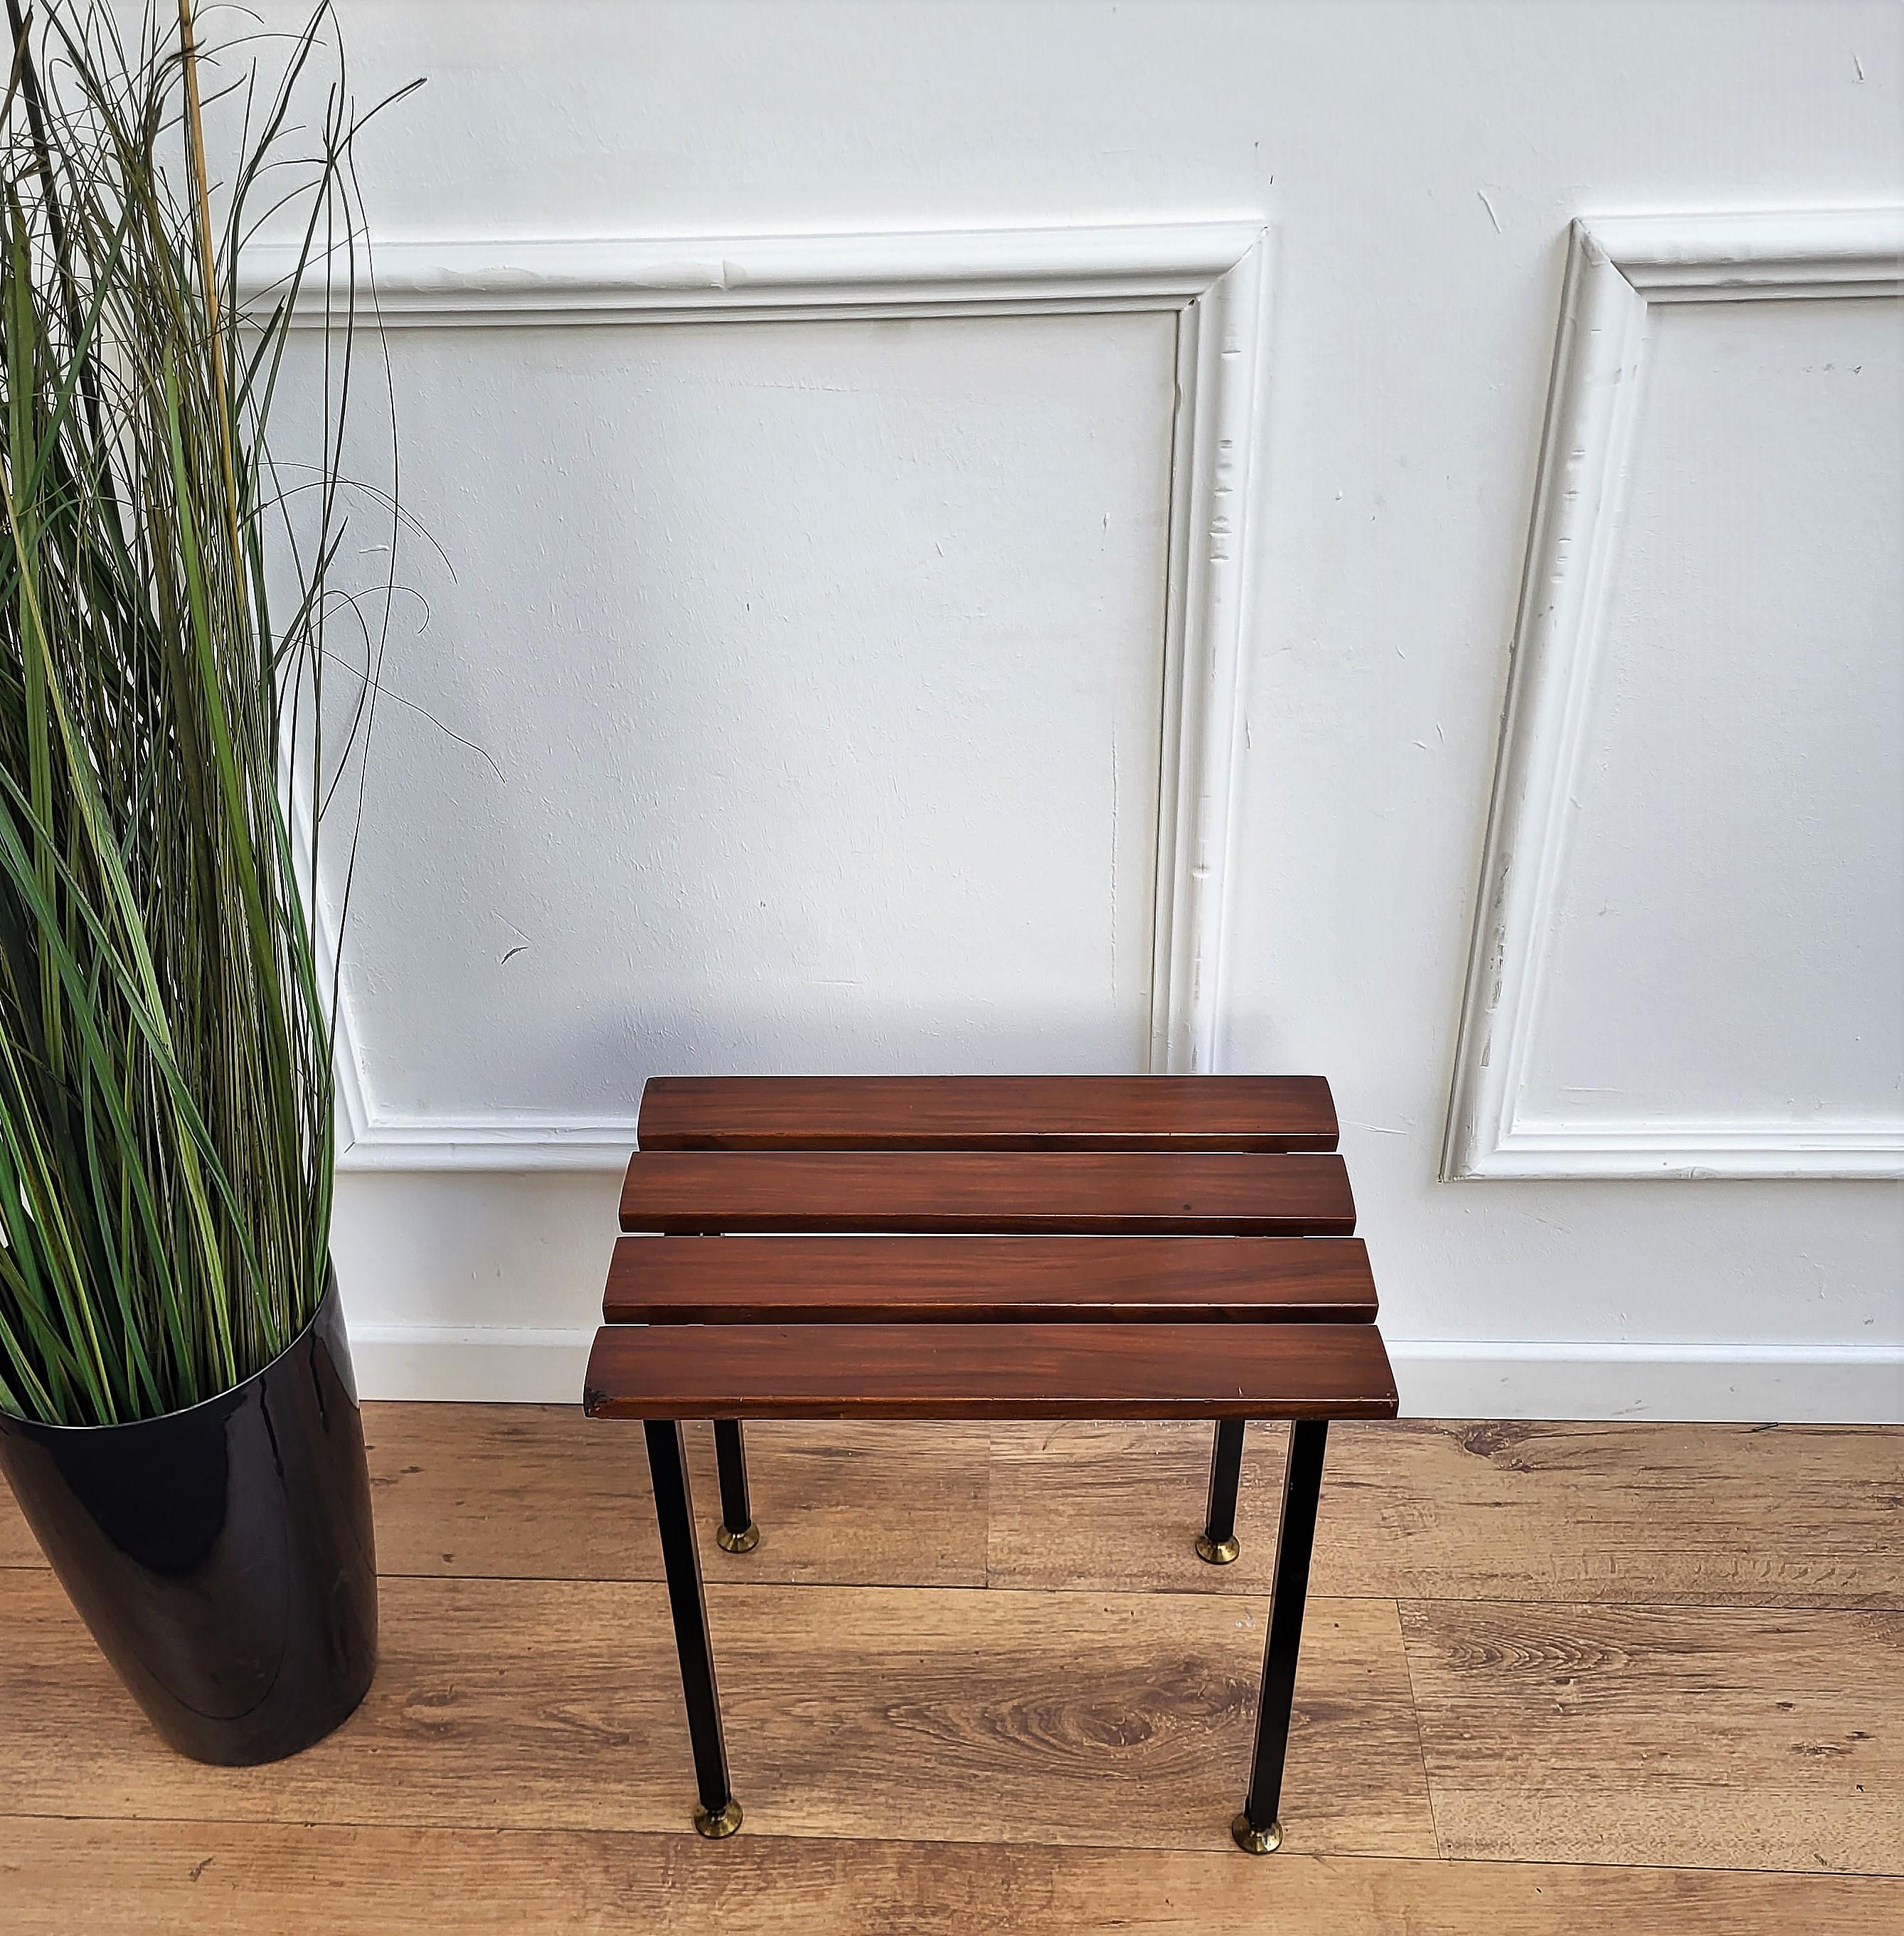 Italian Mid-Century Modern platform slat bench stool with wood slated top sitting on black metal base and nice brass foot-ends. This beautiful side piece can be used as a coffee table.